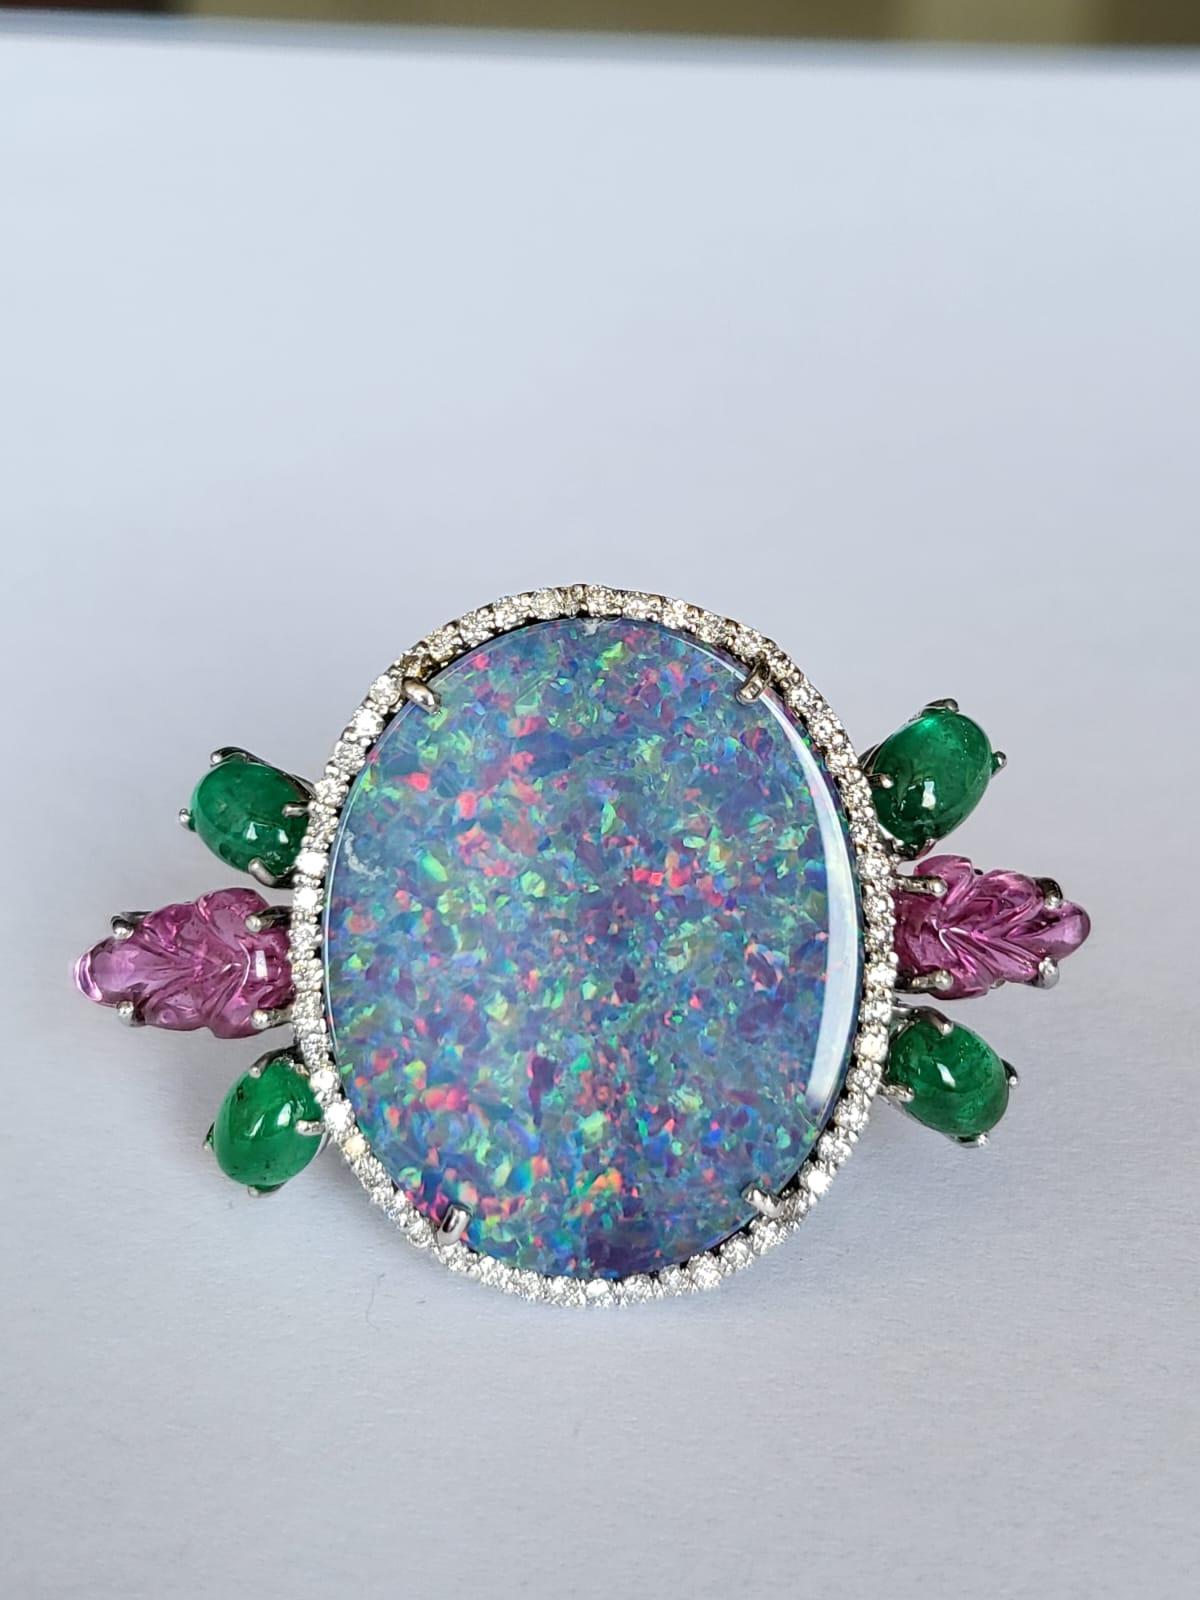 A very gorgeous and one of a kind, Doublet Opal, Emerald & Tourmaline Cocktail Ring set in 18K White Gold & Diamonds. The weight of the Doublet Opal is 13.67 carats. The Doublet is of Australian origin. The weight of the Emeralds is 1.95 carats. The